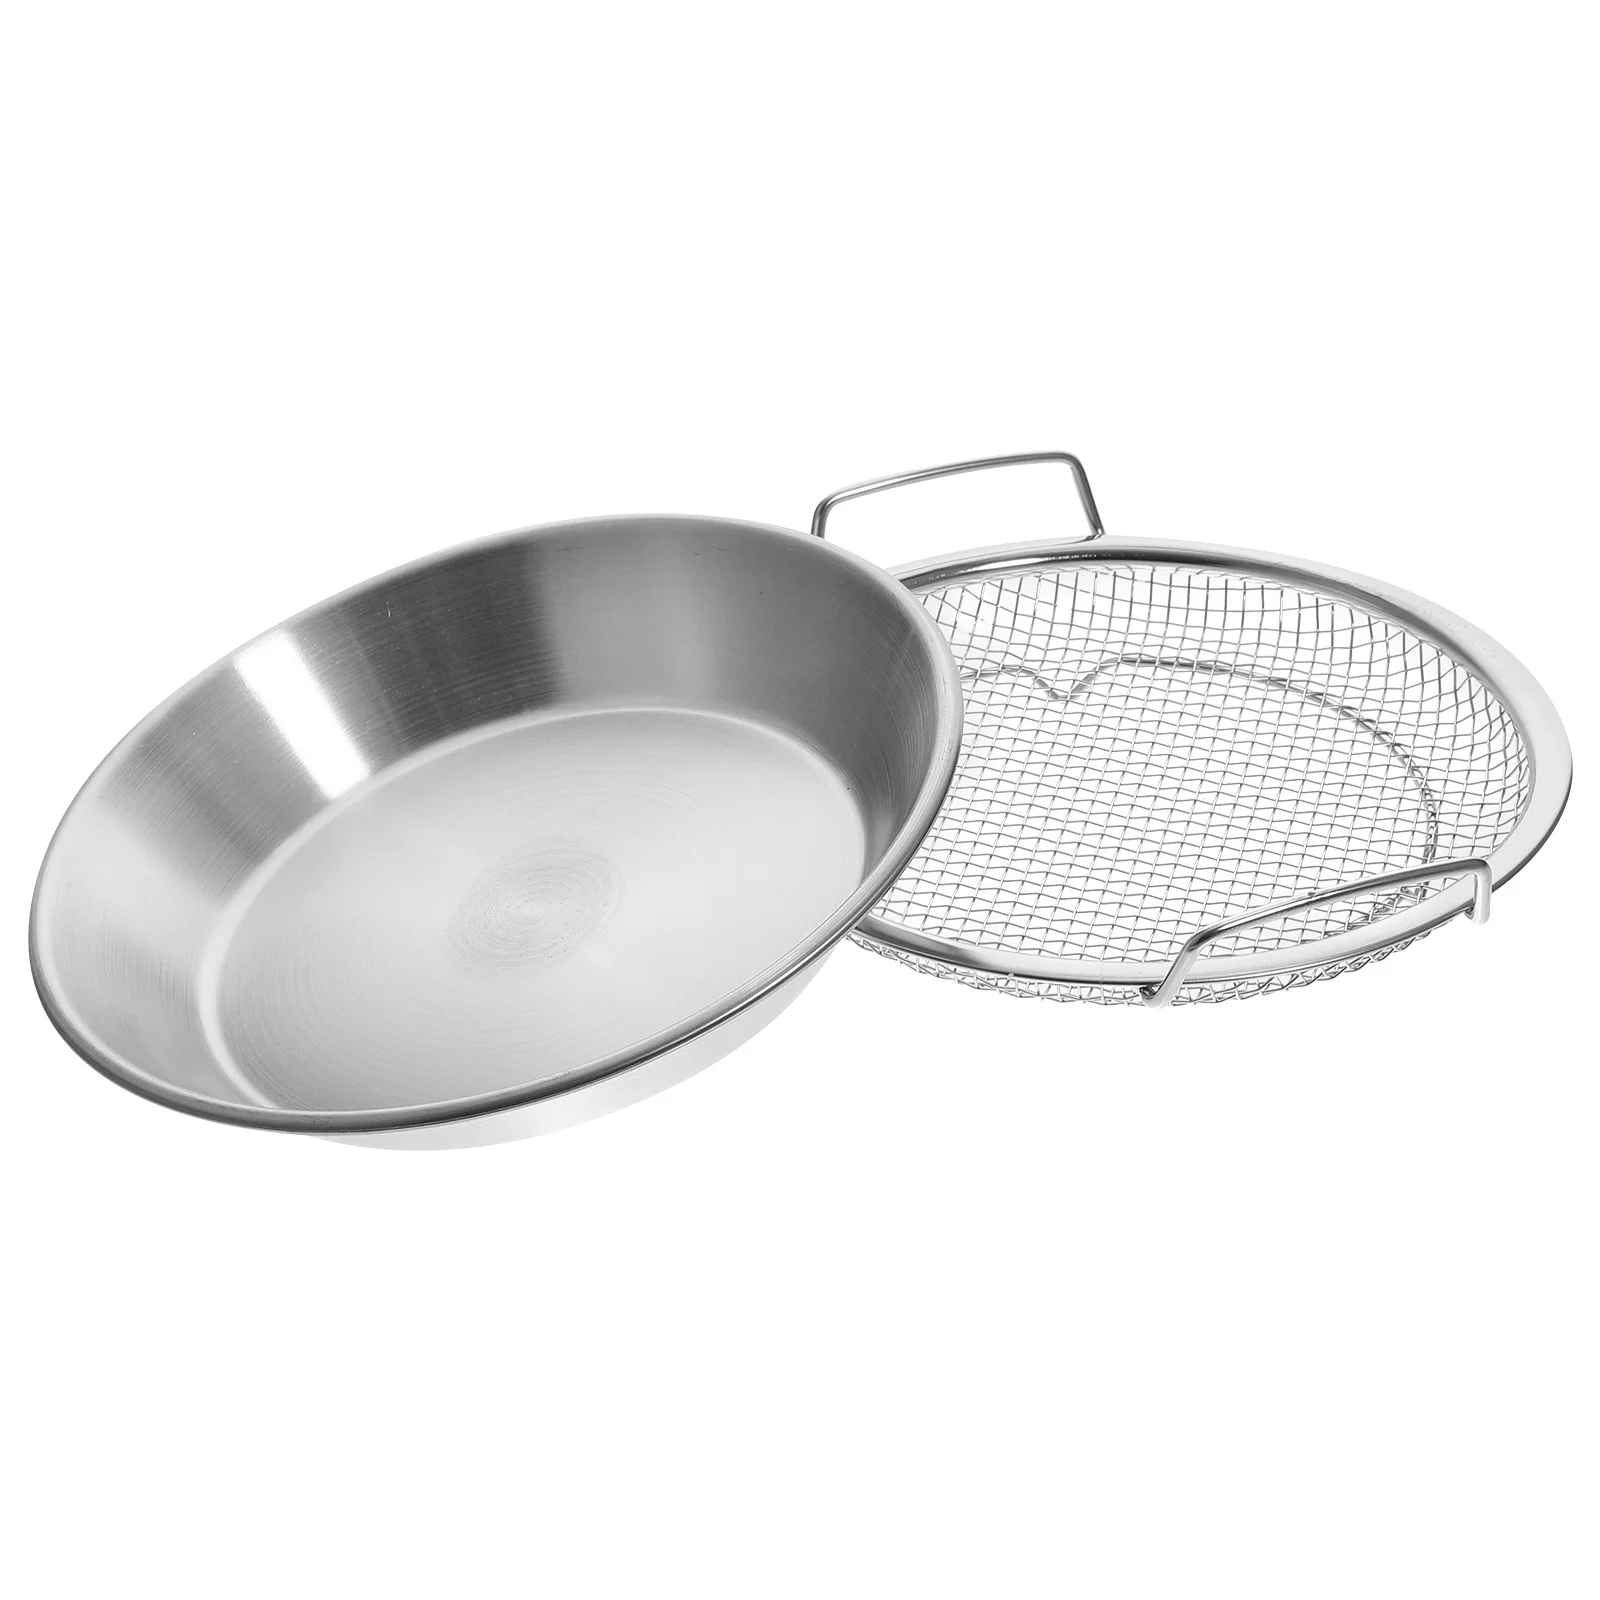 

Mesh Drain Pan Plate Snack Oil Stainless Steel Baking Fried Food Holder Grilled Tray Convenient Fruits Dinner Serving Dish